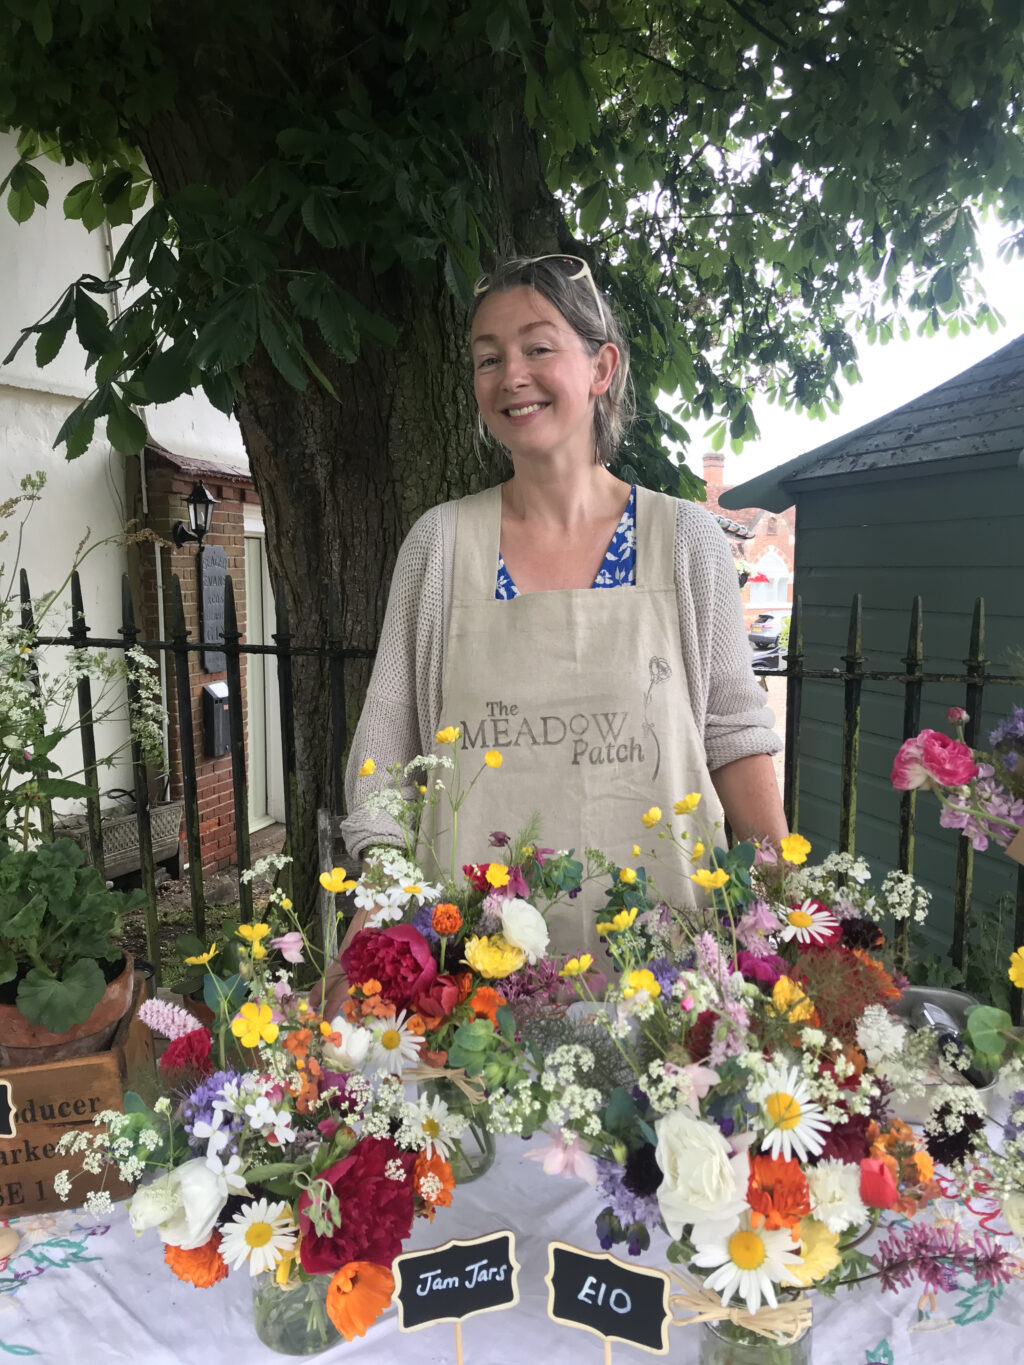 Victoria Uff of The Meadow Patch selling locally grown British flowers at her market stall